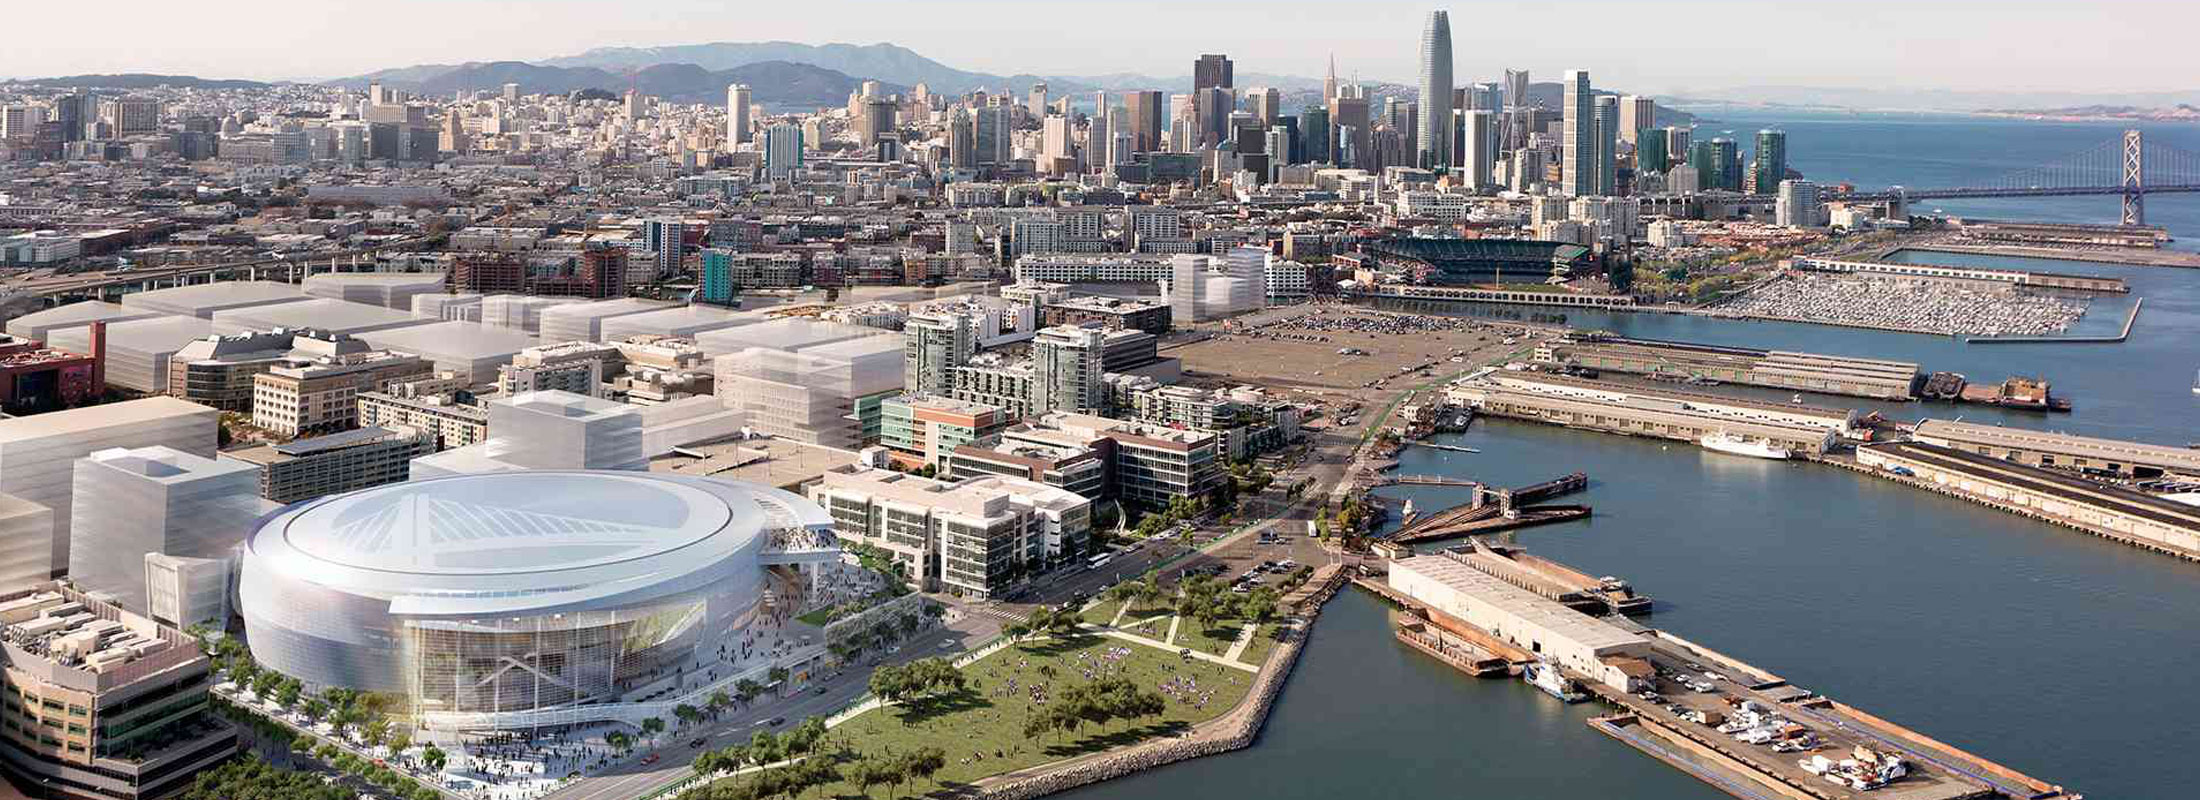 The brand new Chase Center in San Francisco is scheduled to house the Golden State Warriors starting in 2019.